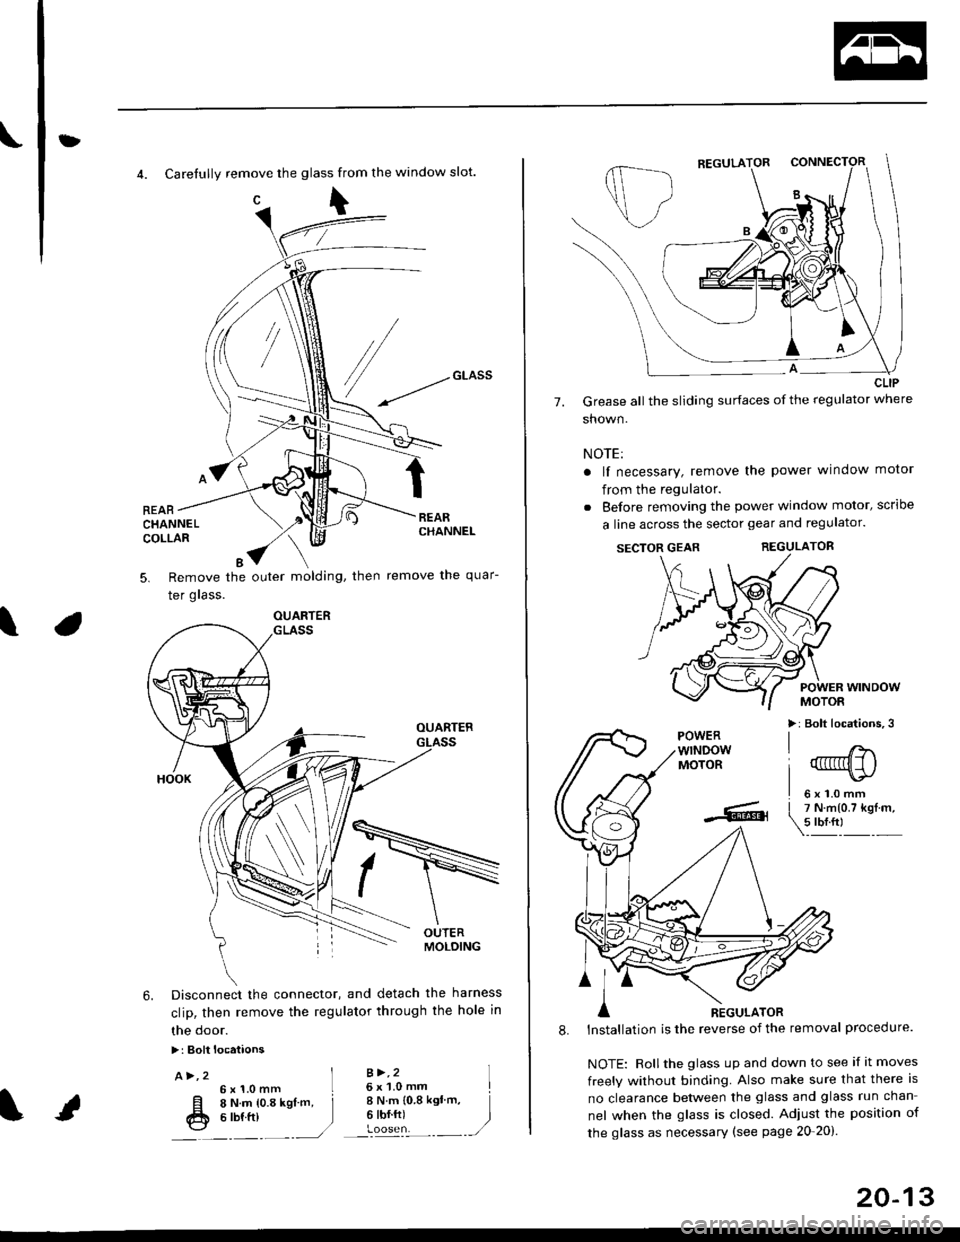 HONDA CIVIC 1996 6.G Workshop Manual t}
4. Carefully remove the glass from the window slot.
c\
REARCHANNELCOLLAR
Remove the outer molding, then
Ier grass.
remove the quar-5.
\
6. Disconnect the connector, and detach the harness
clip, the